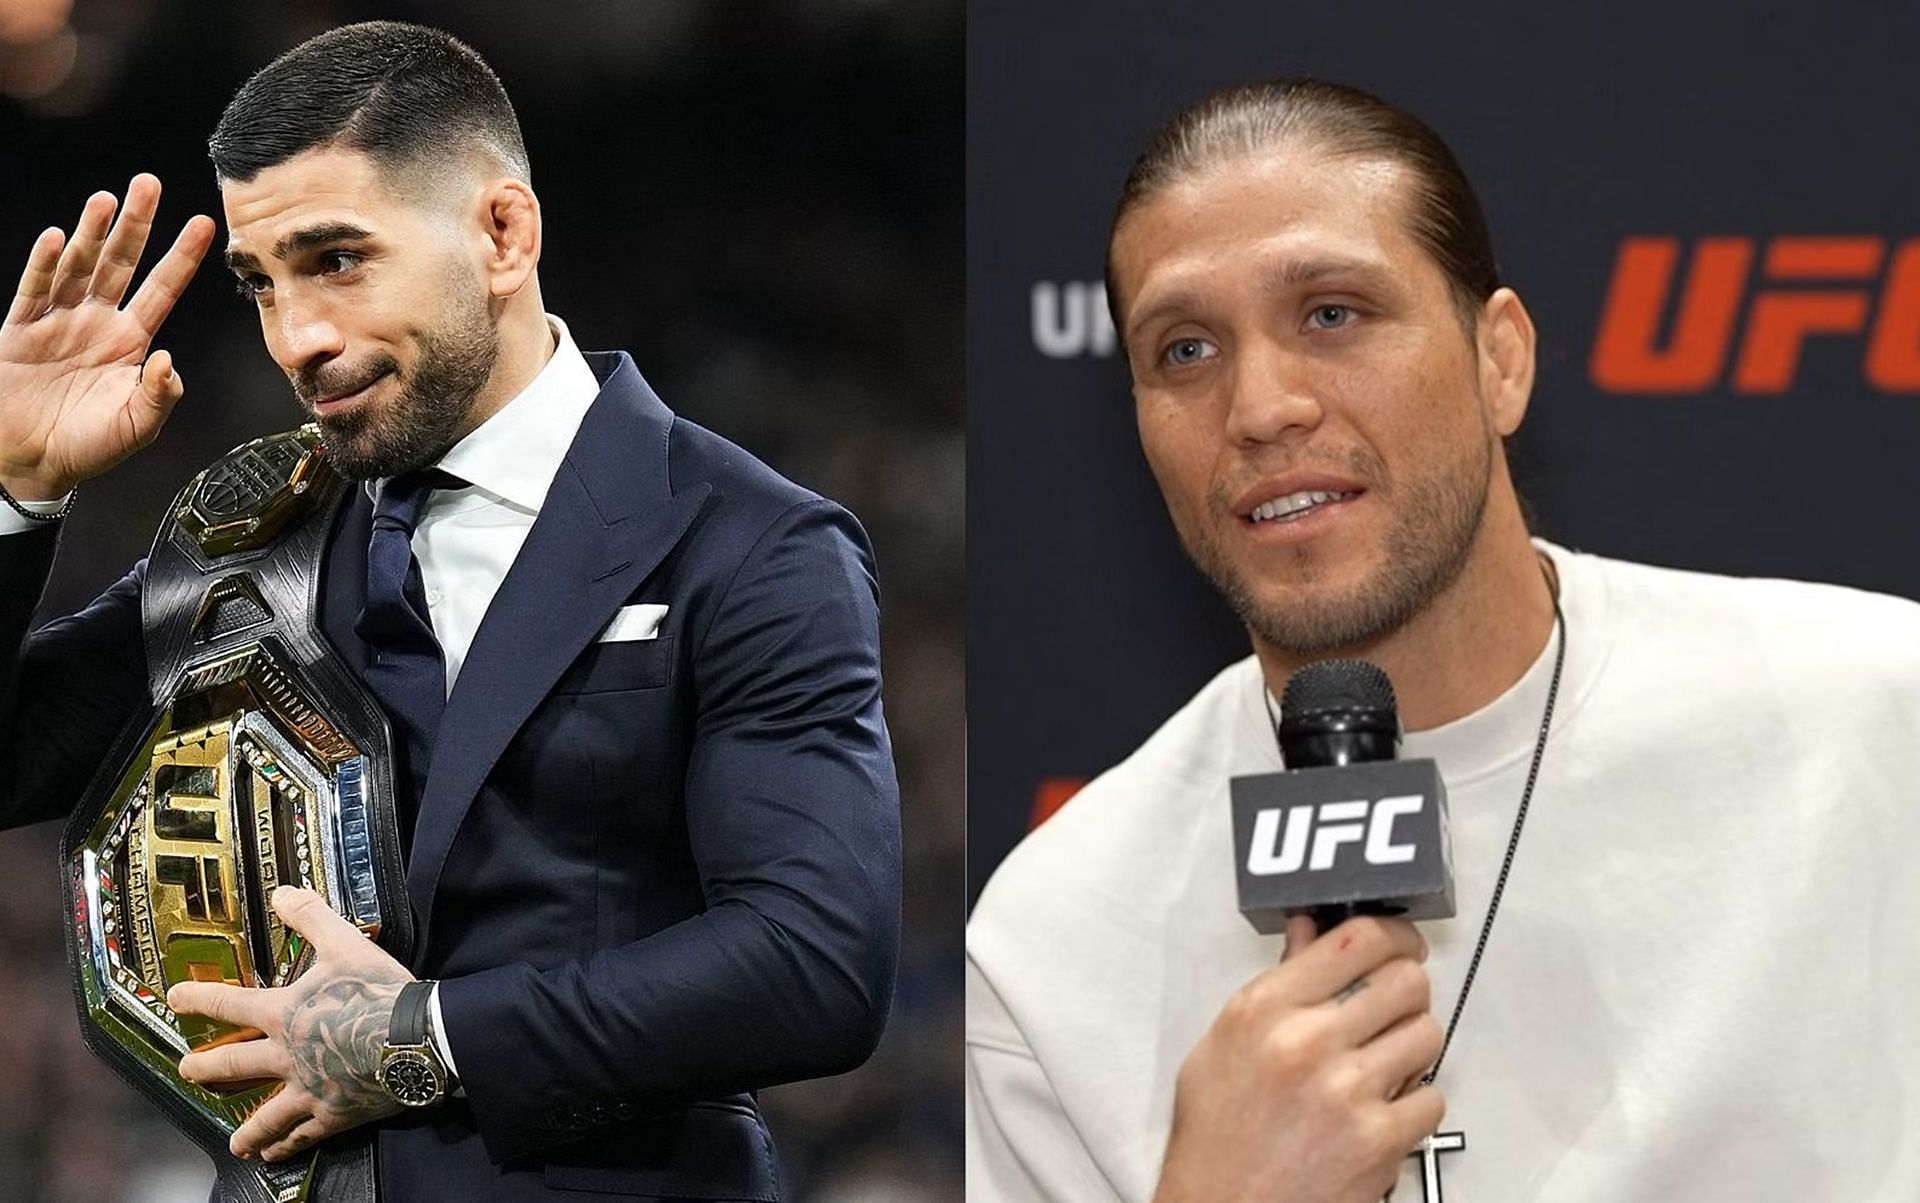 Brian Ortega (right) is open to fighting Ilia Topuria (left) in Spain [Images via UFC.com and Getty Images]